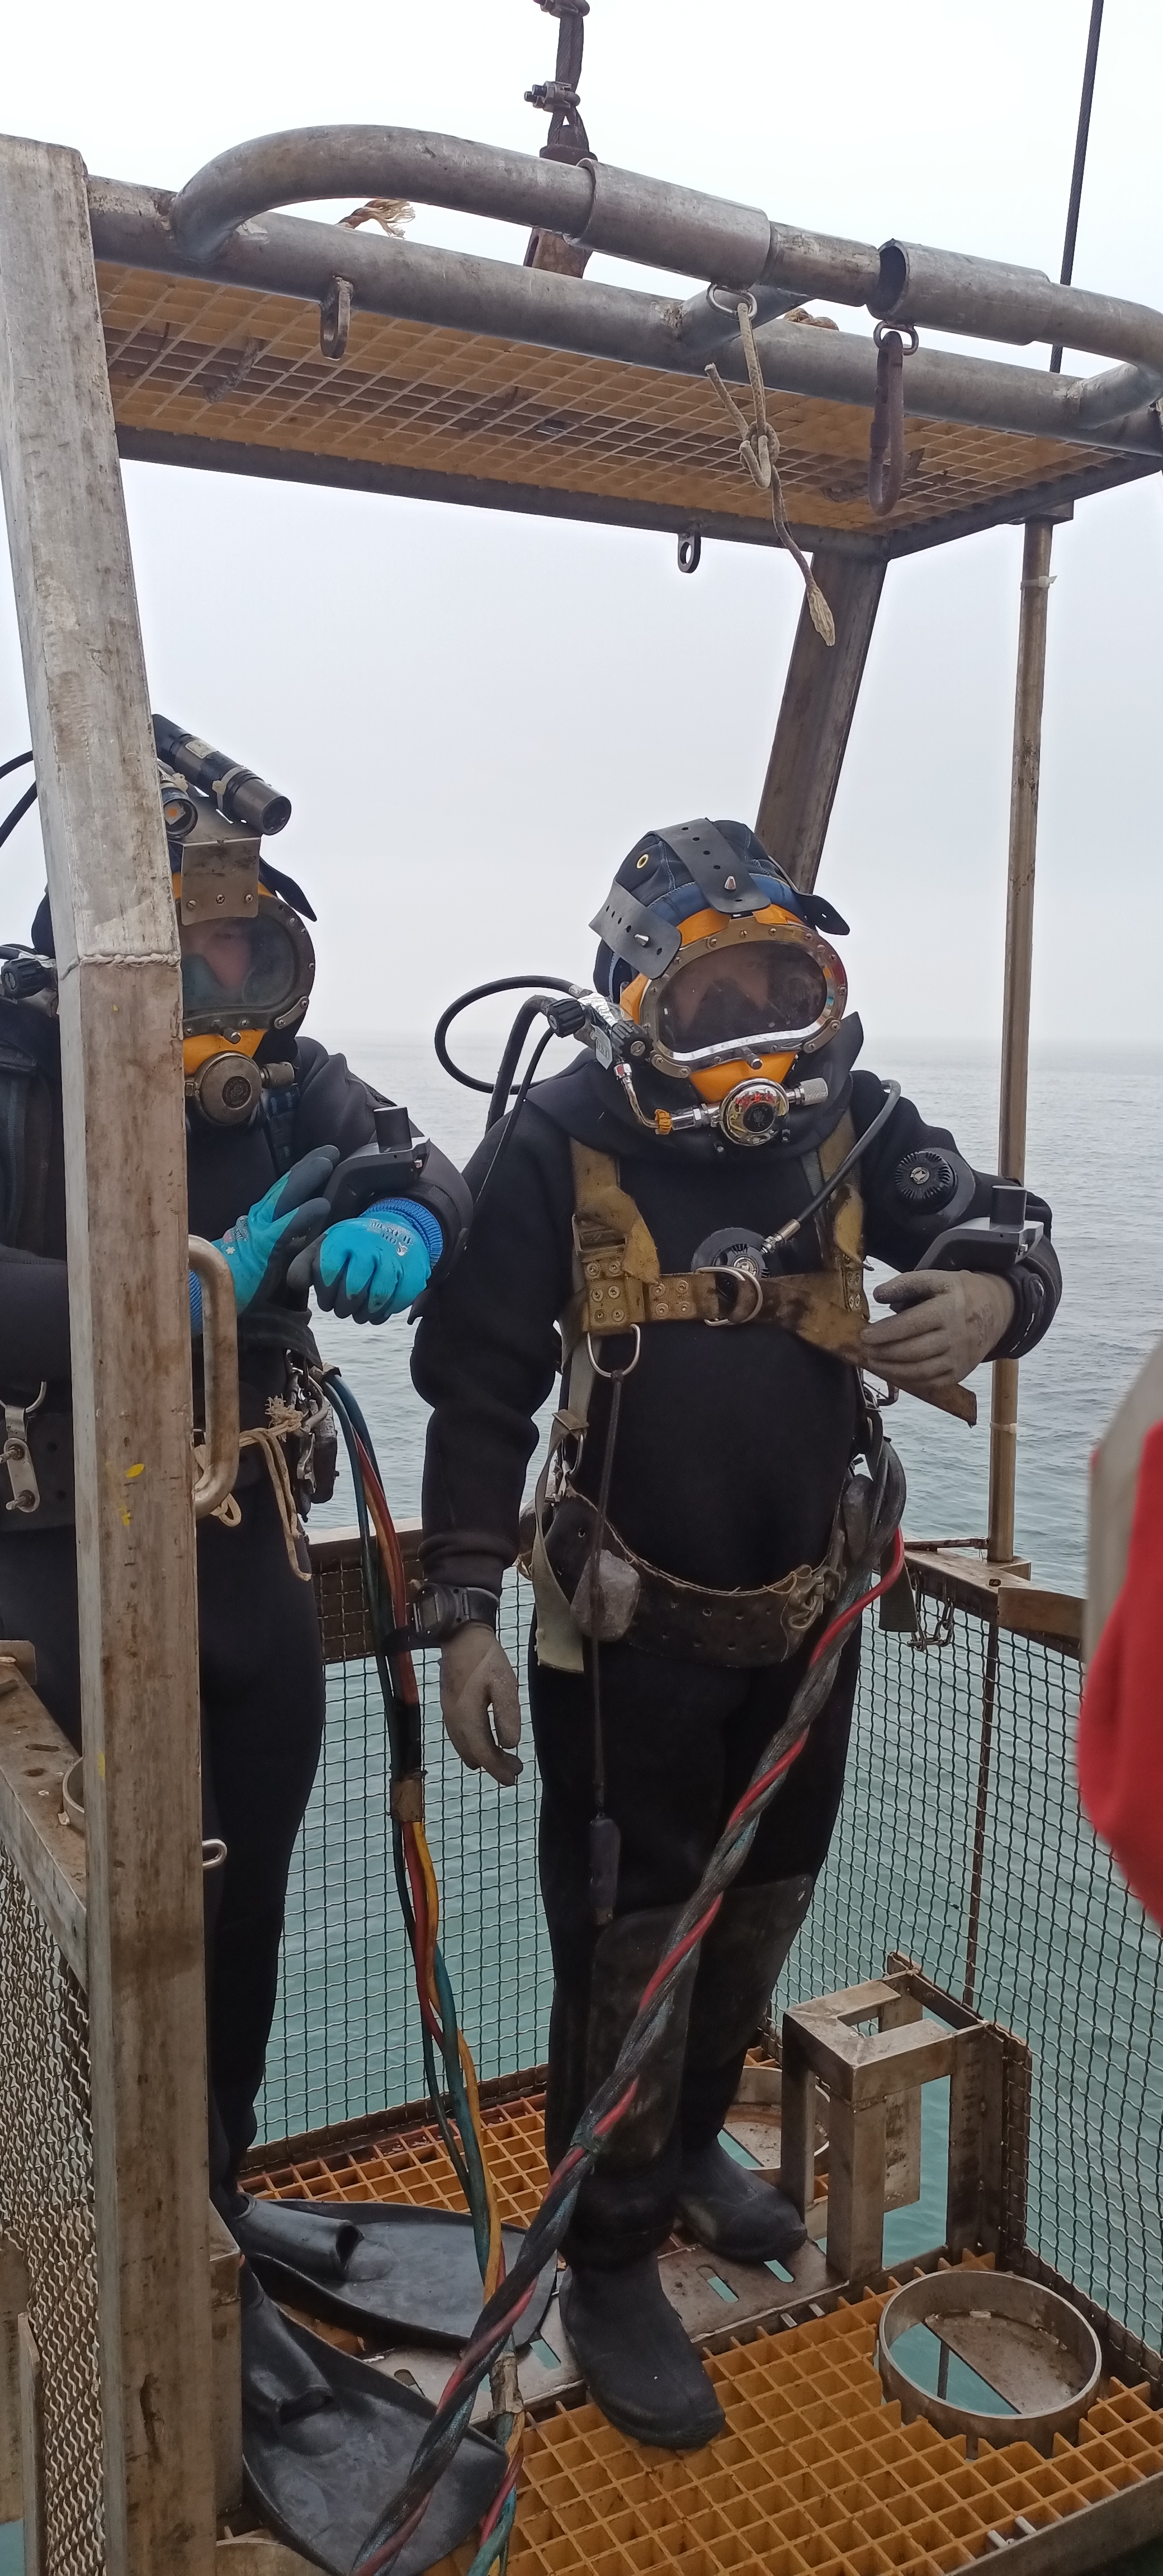 Rescue and salvage Application : Divers positioning and communication system deployed in the salvage